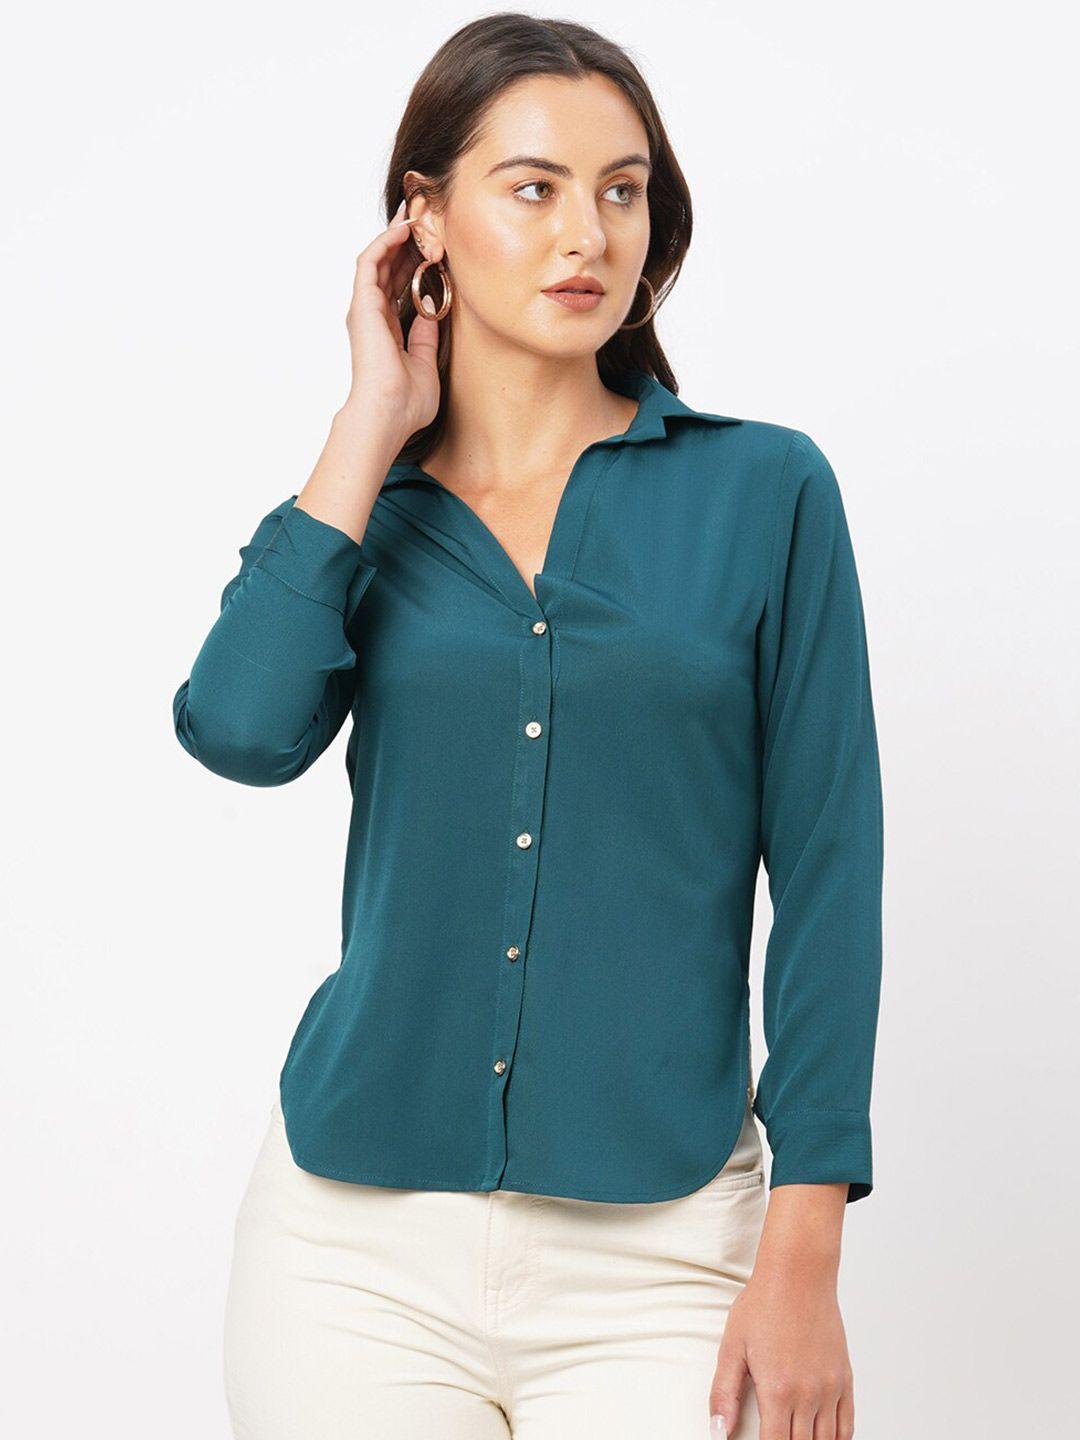 mish cuffed sleeves crepe shirt style top